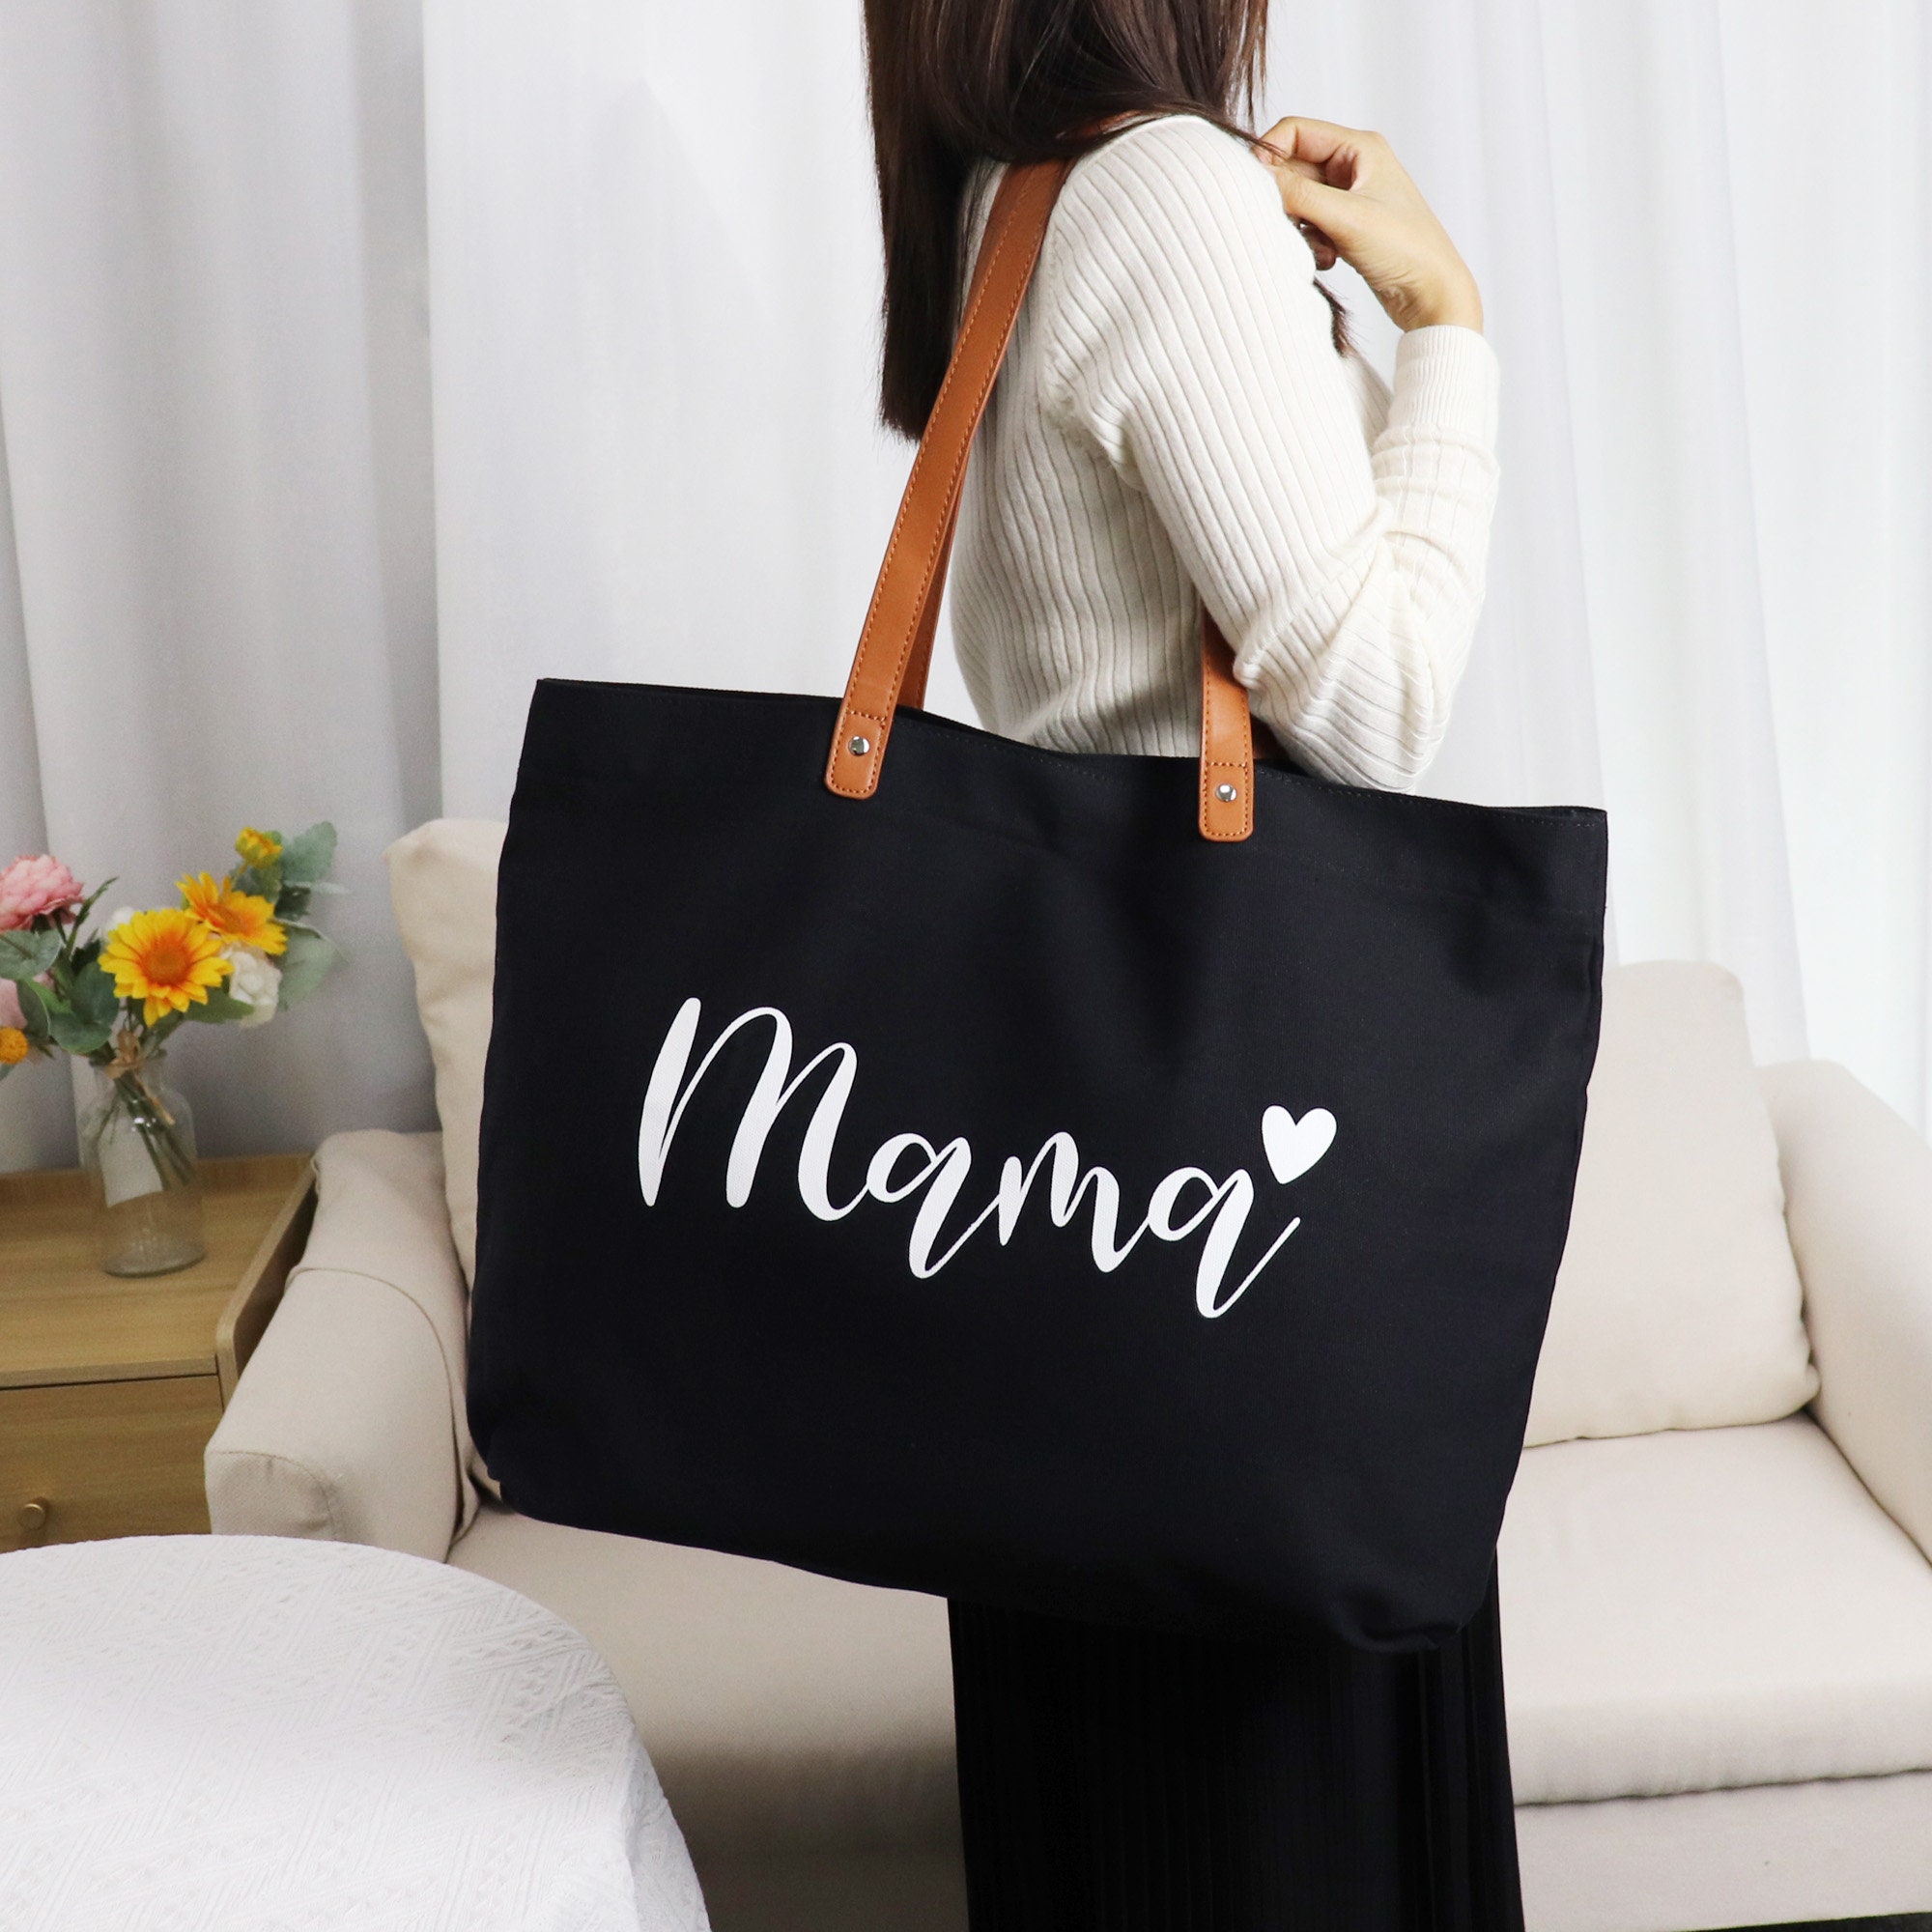 Mama Bear Tote Bag - Mommy Bag for Hospital - Mom Bags for Women, Maternity  Bags for Expecting Mamas, Presents for Birthday, Christmas, Mother's Day,  Gifts for Mom, Pregnancy Gift (Tessa) 